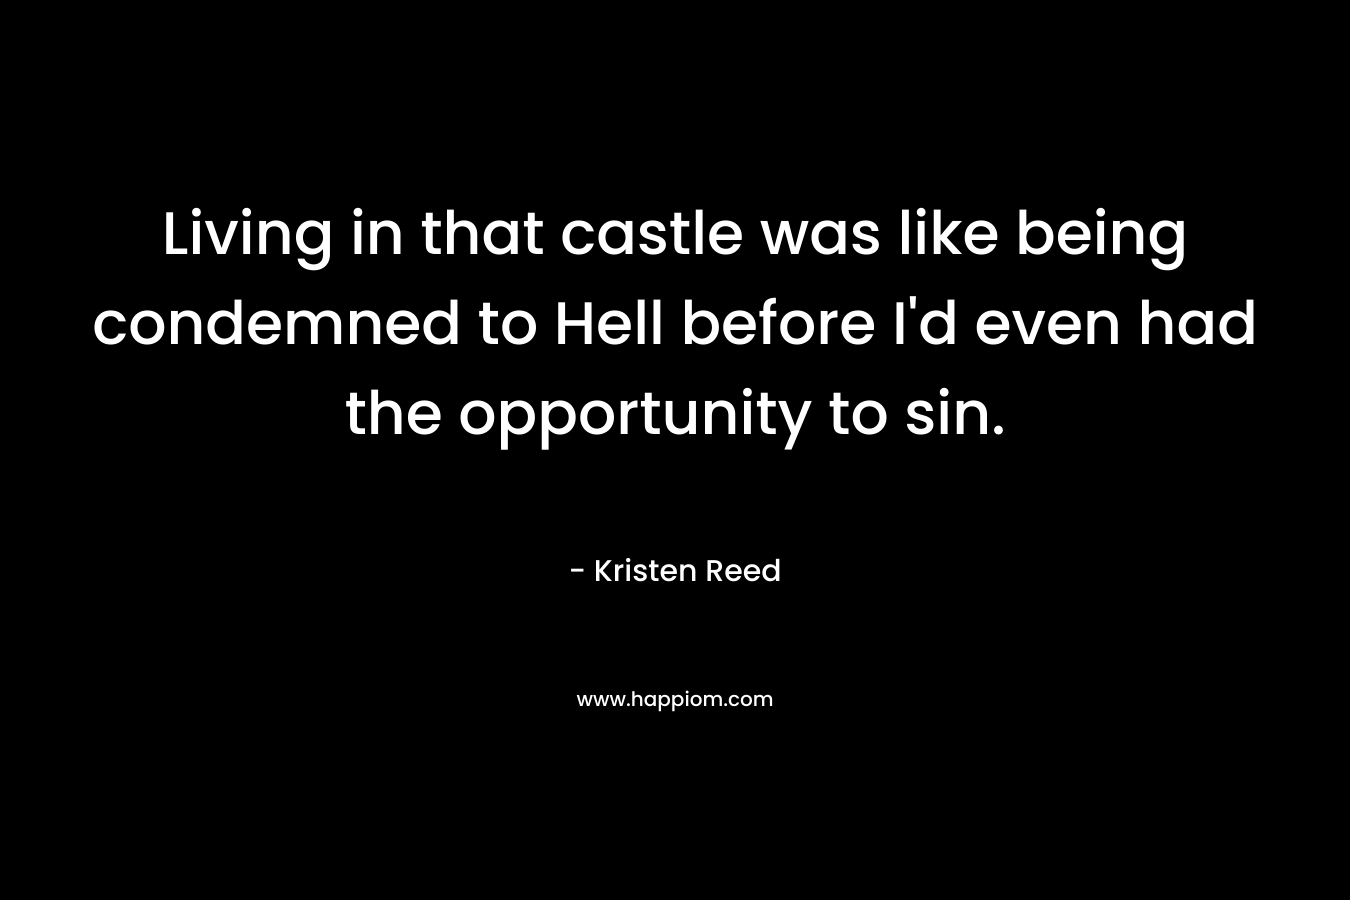 Living in that castle was like being condemned to Hell before I'd even had the opportunity to sin.